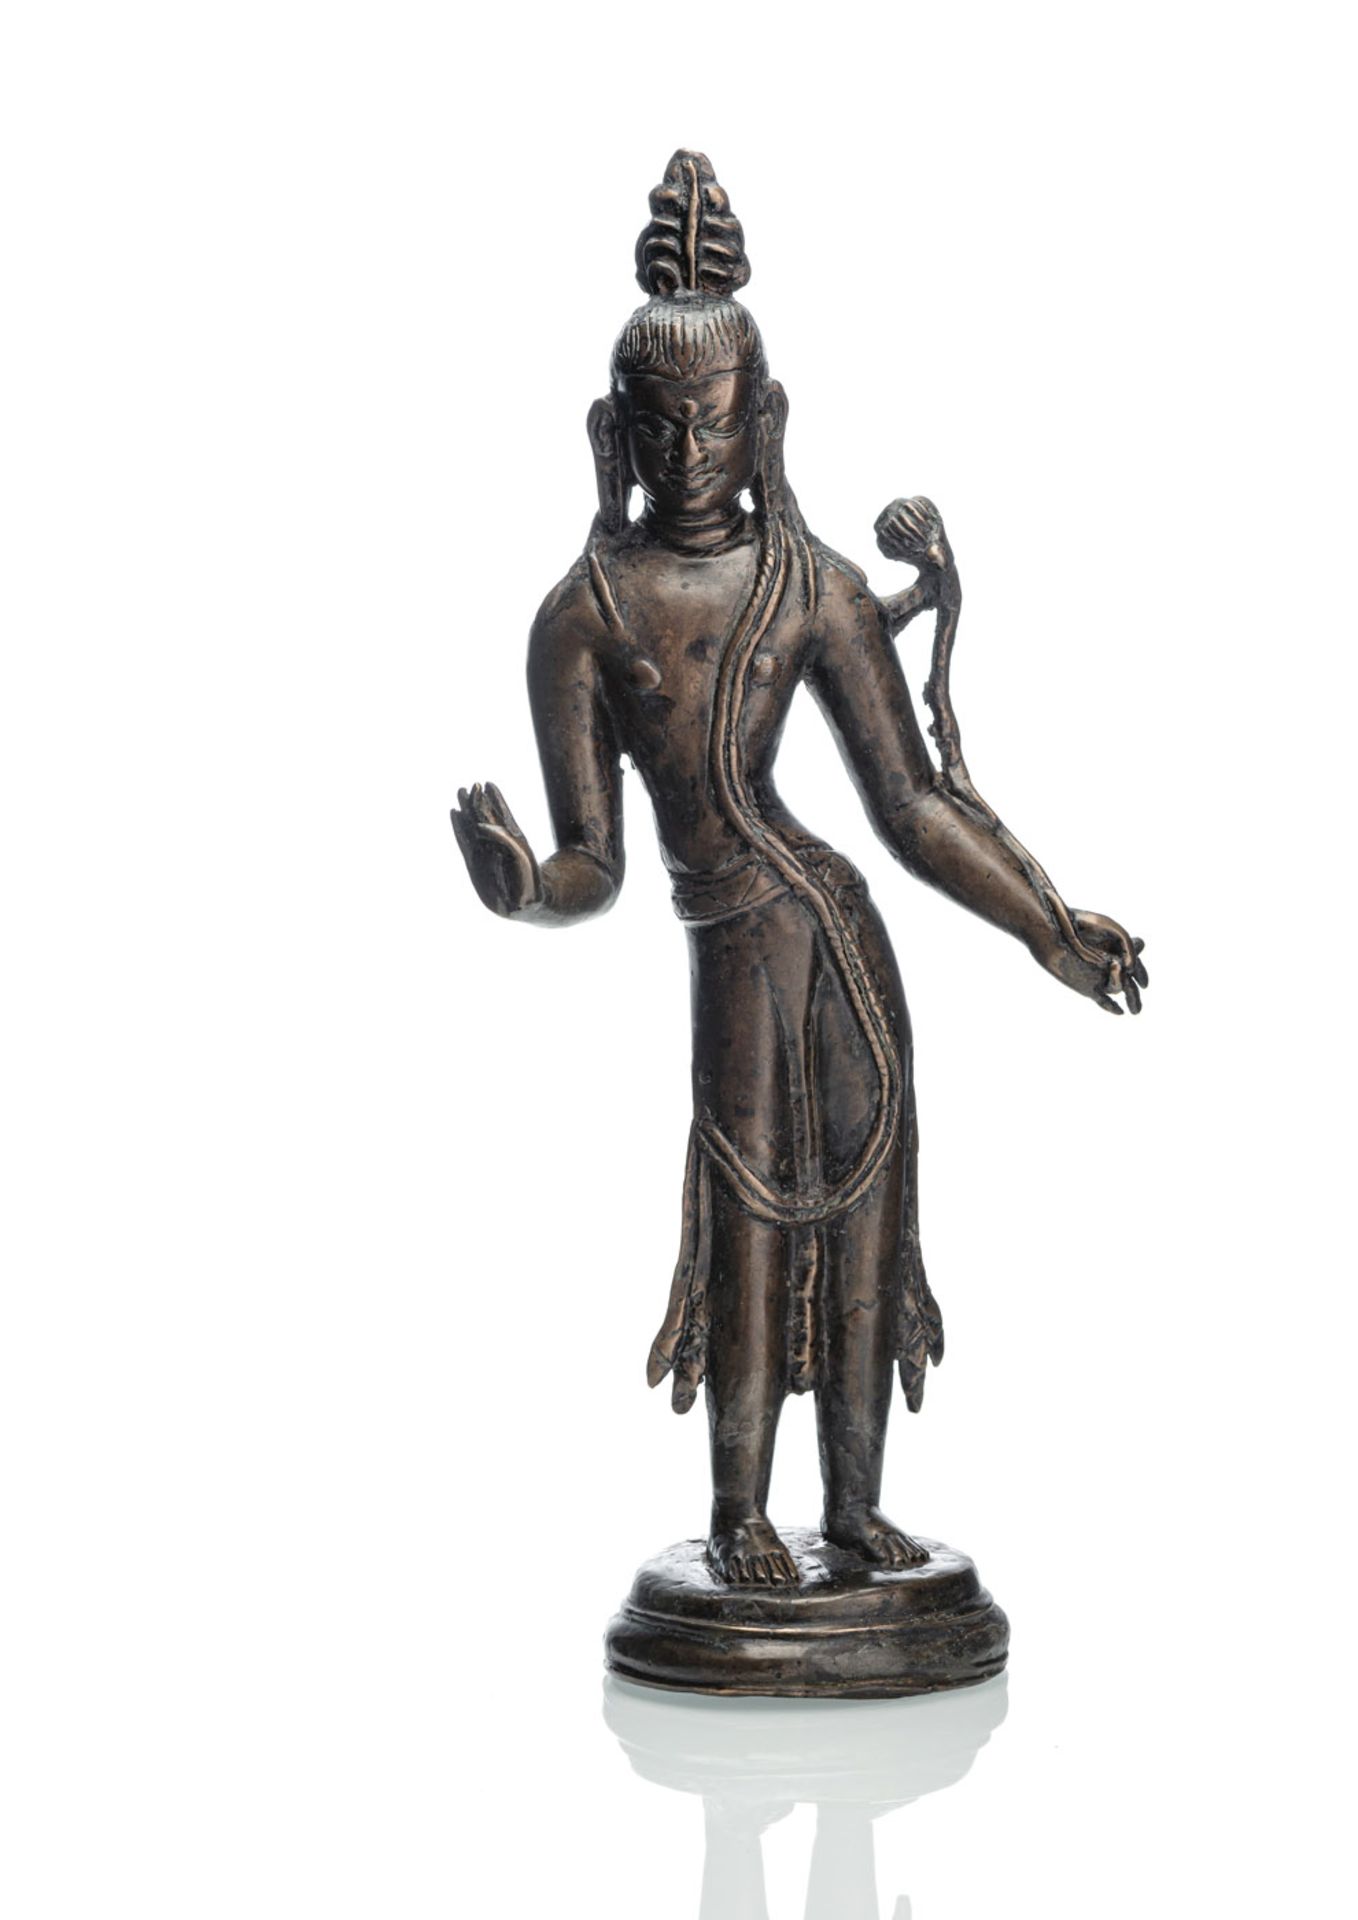 A RARE AND EARLY BRONZE FIGURE OF PADMAPANI - Image 2 of 7